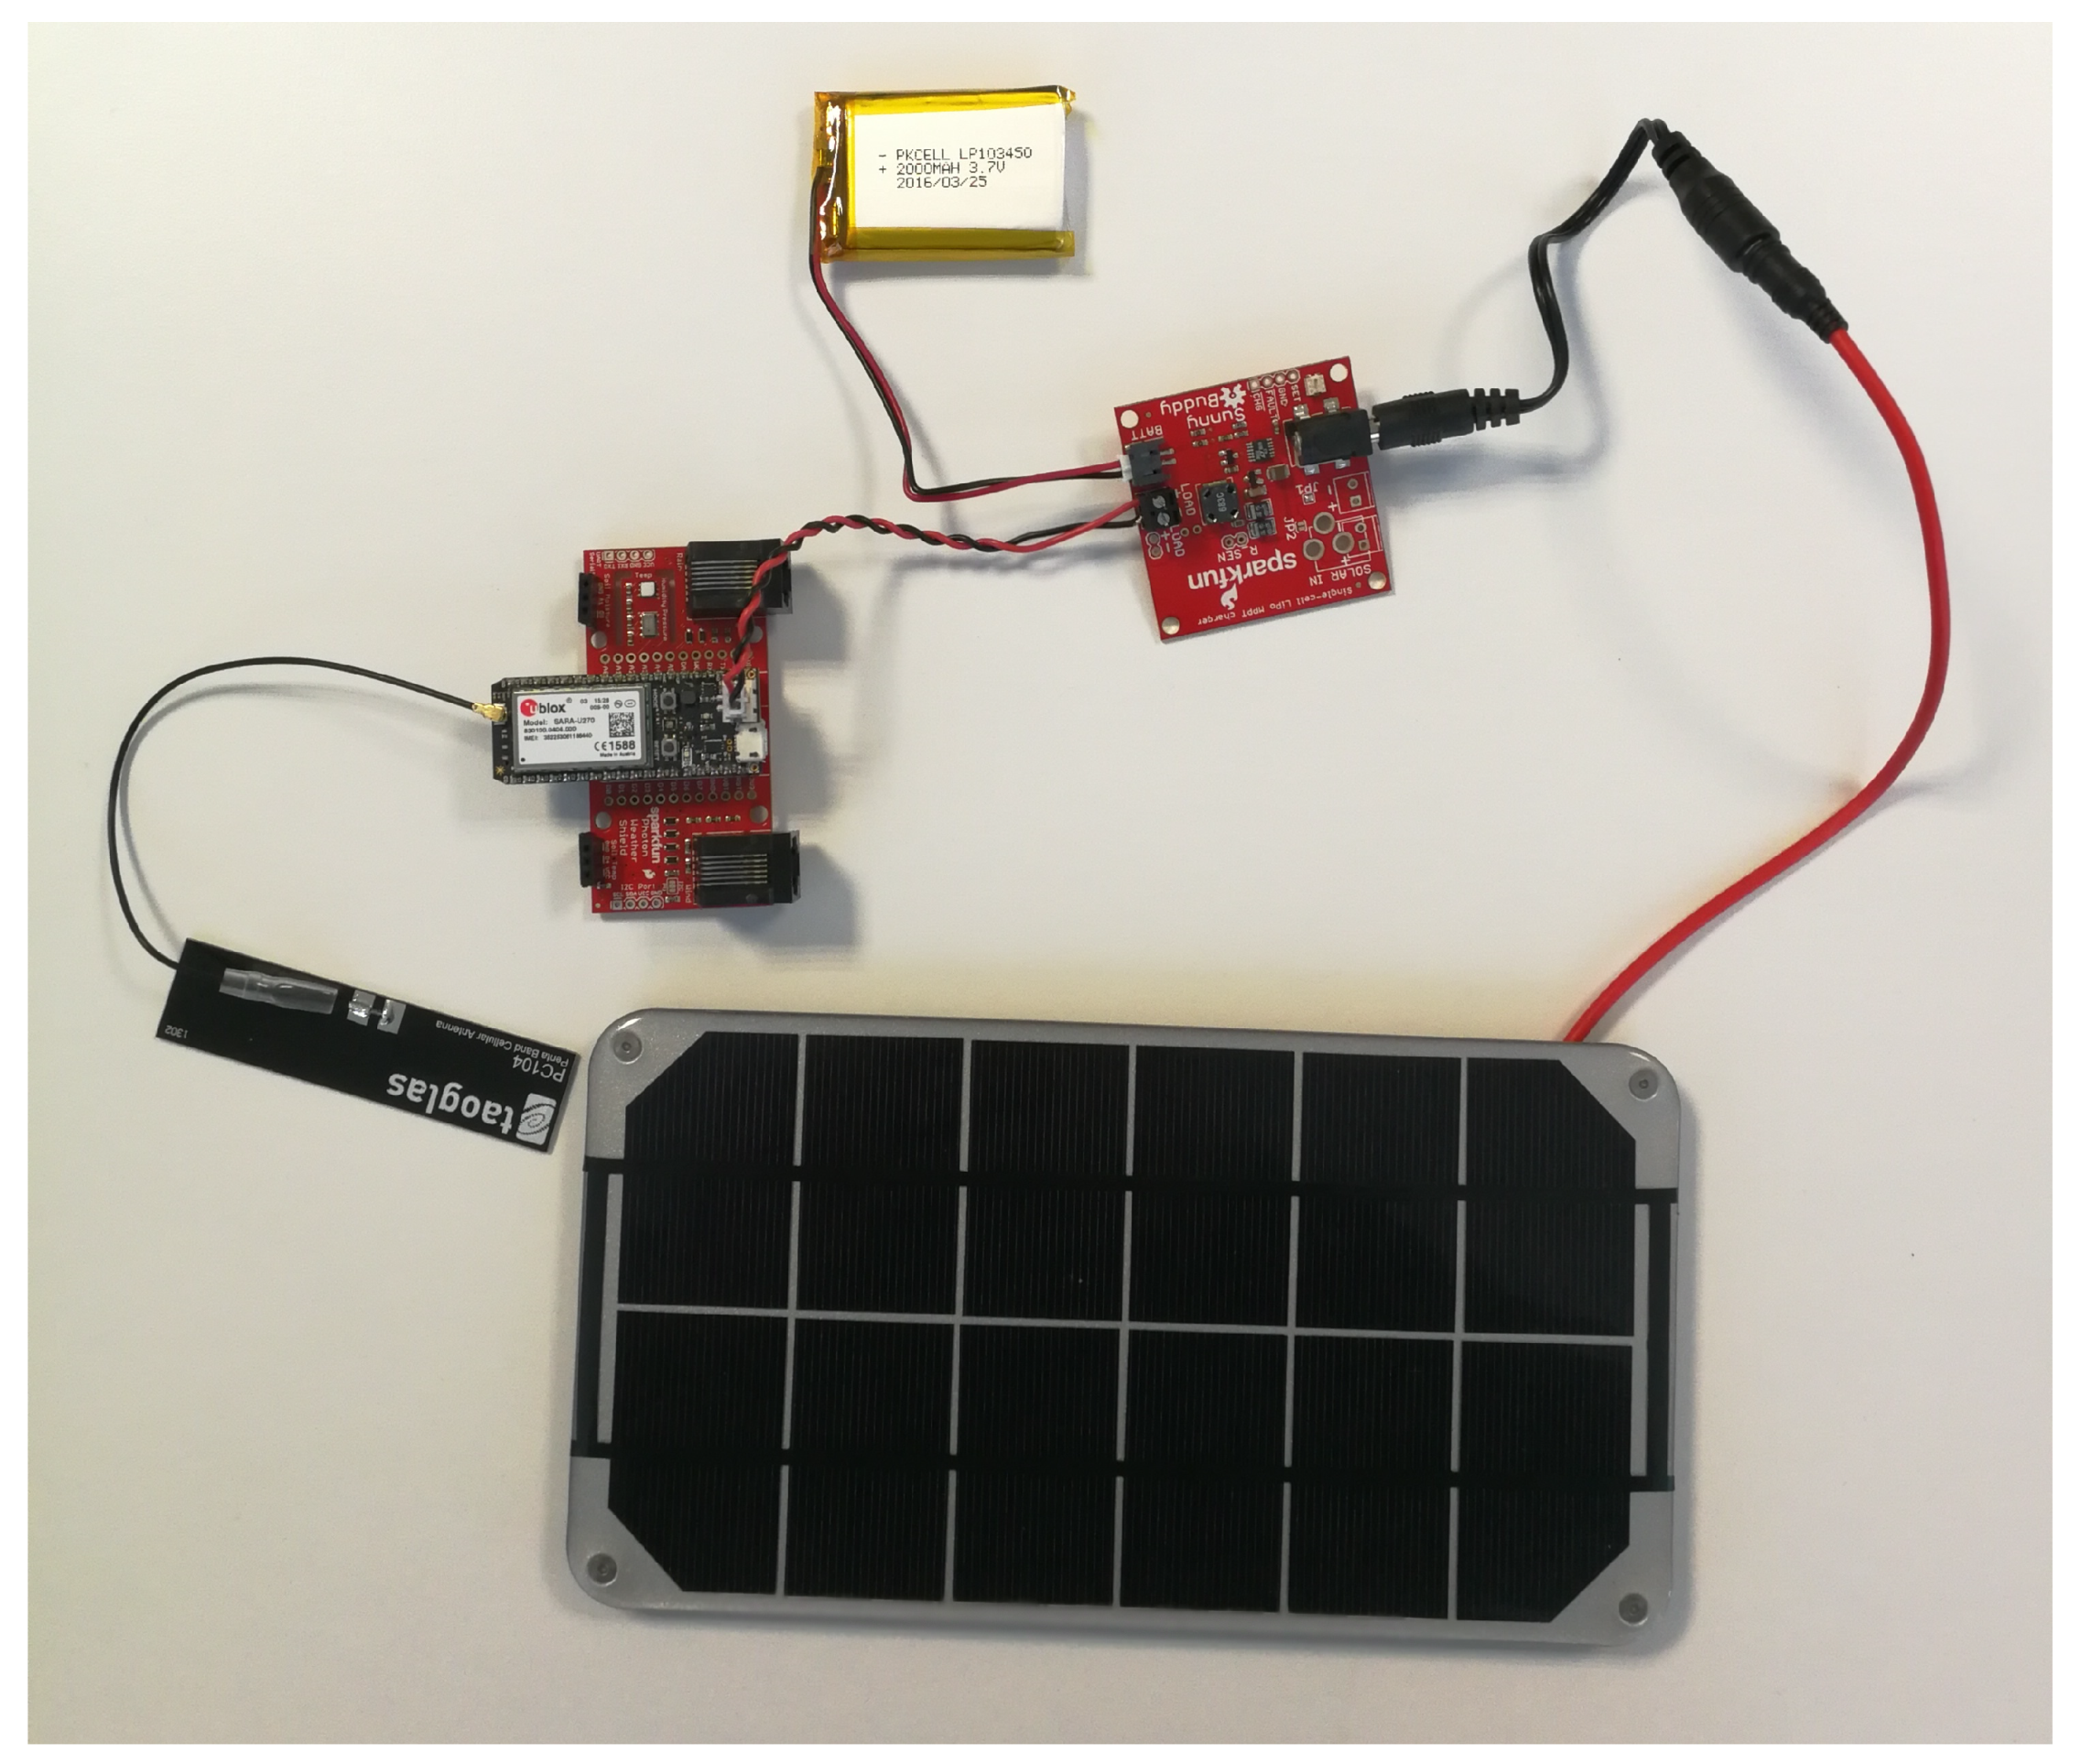 Electronics | Free Full-Text | Comprehensive IoT Node Proposal Using Open Hardware. A Smart Case to Monitor Vineyards | HTML